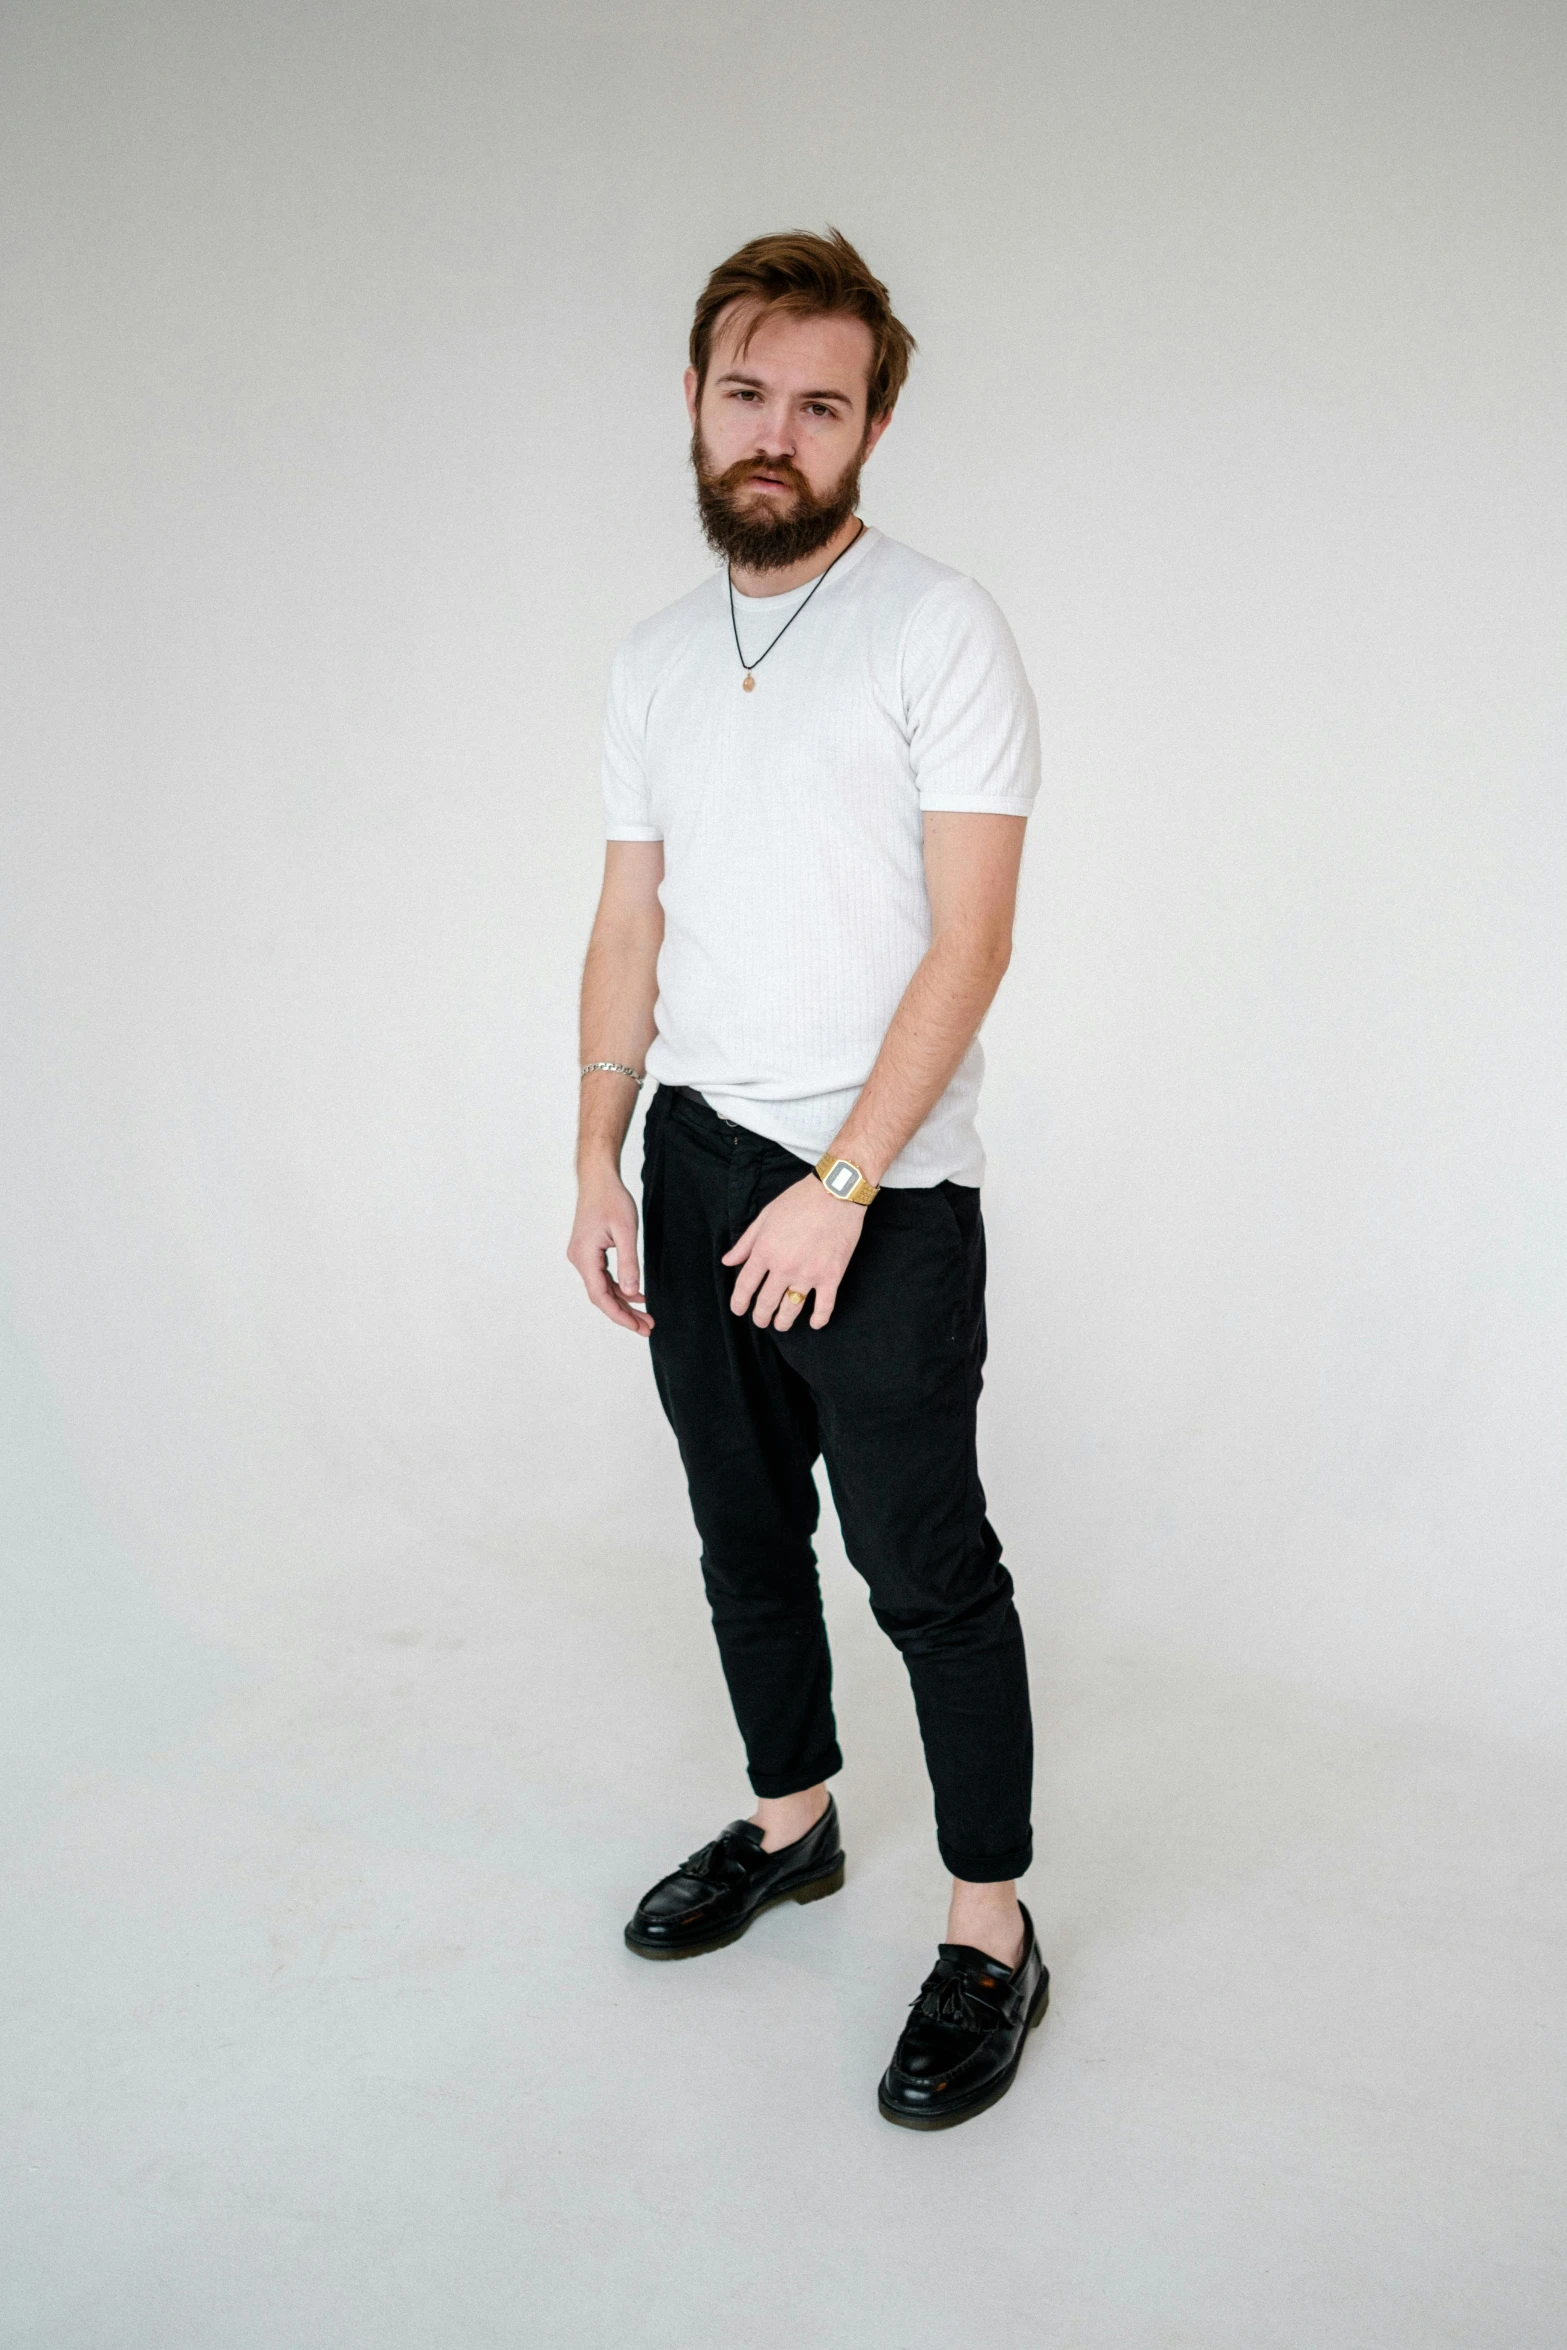 a bearded man in black pants and a white shirt is standing against a white wall